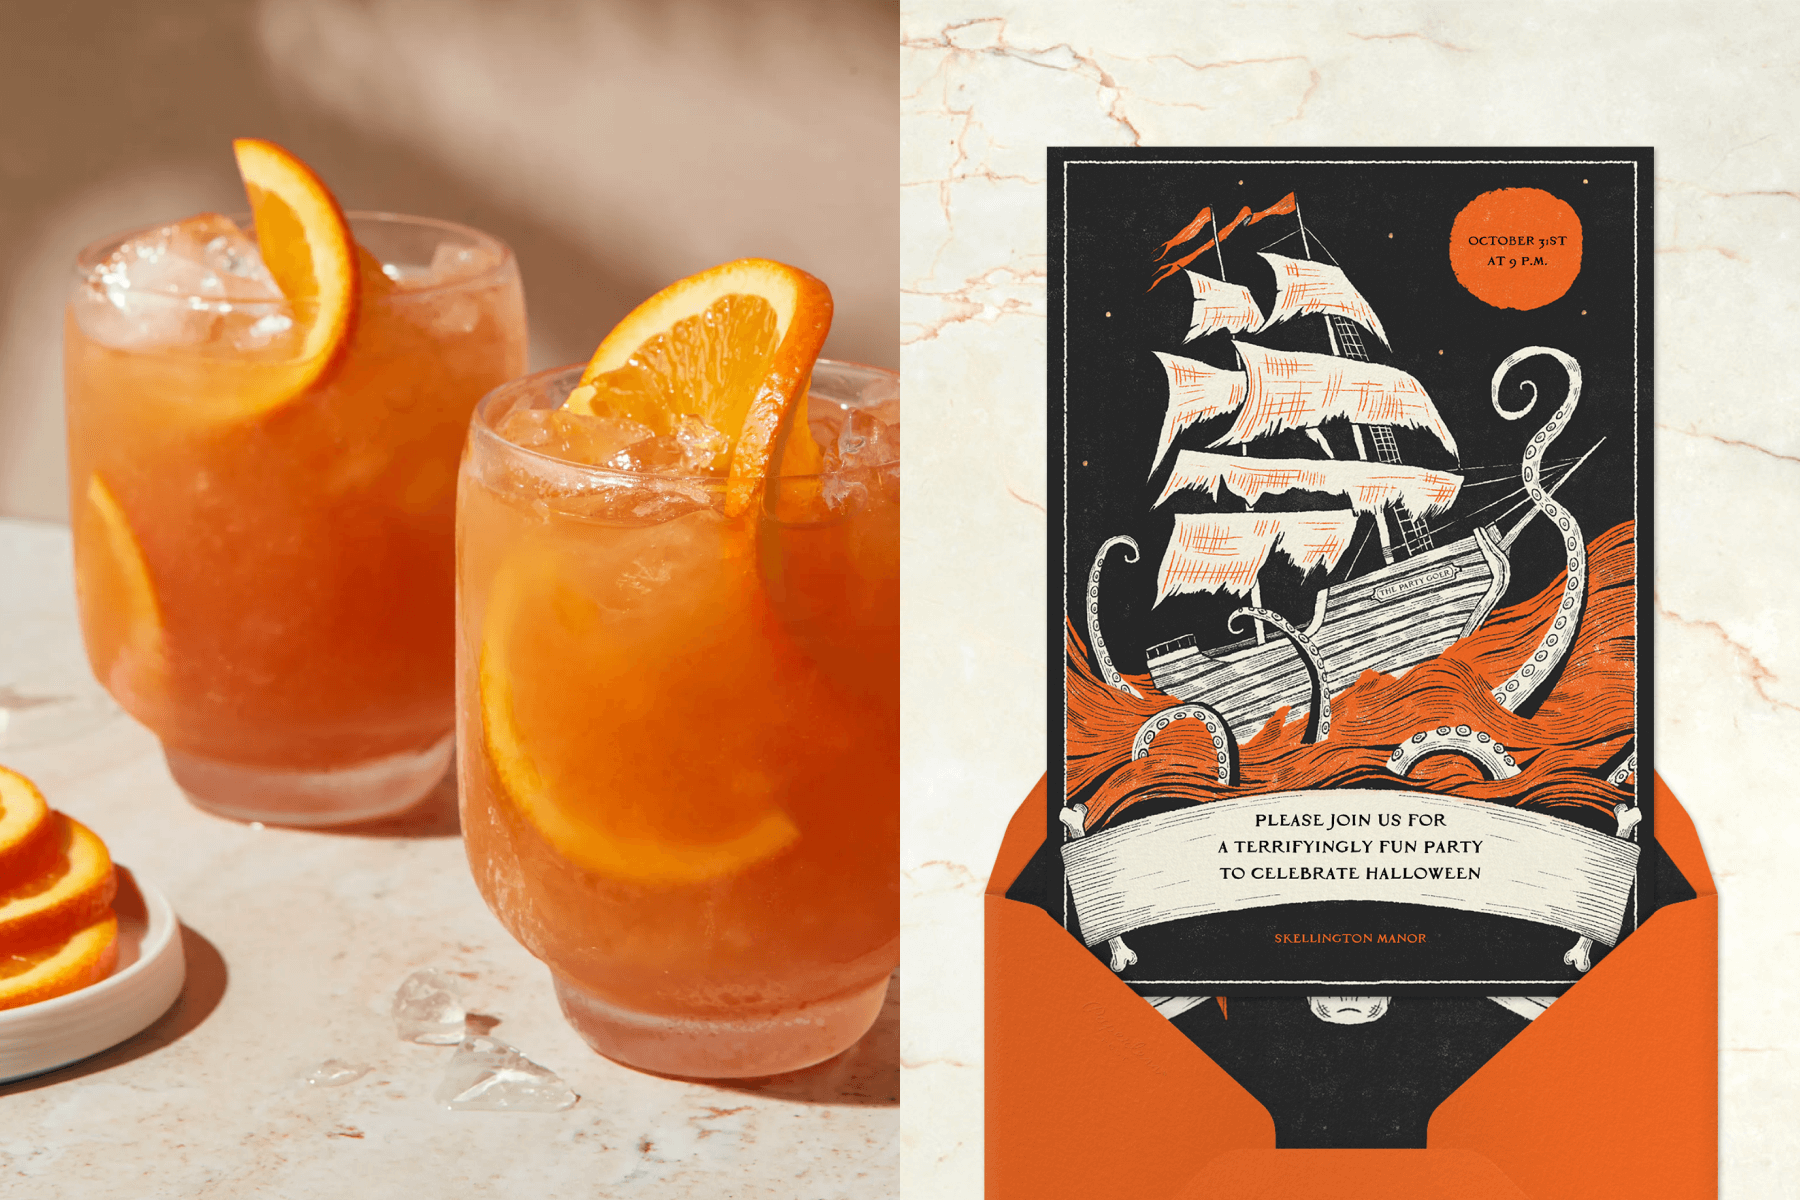 Left: A photograph of two Mai Tais with orange slices as garnish; right: A black and orange Halloween invitation featuring an illustration of a ship being attached by tentacles.